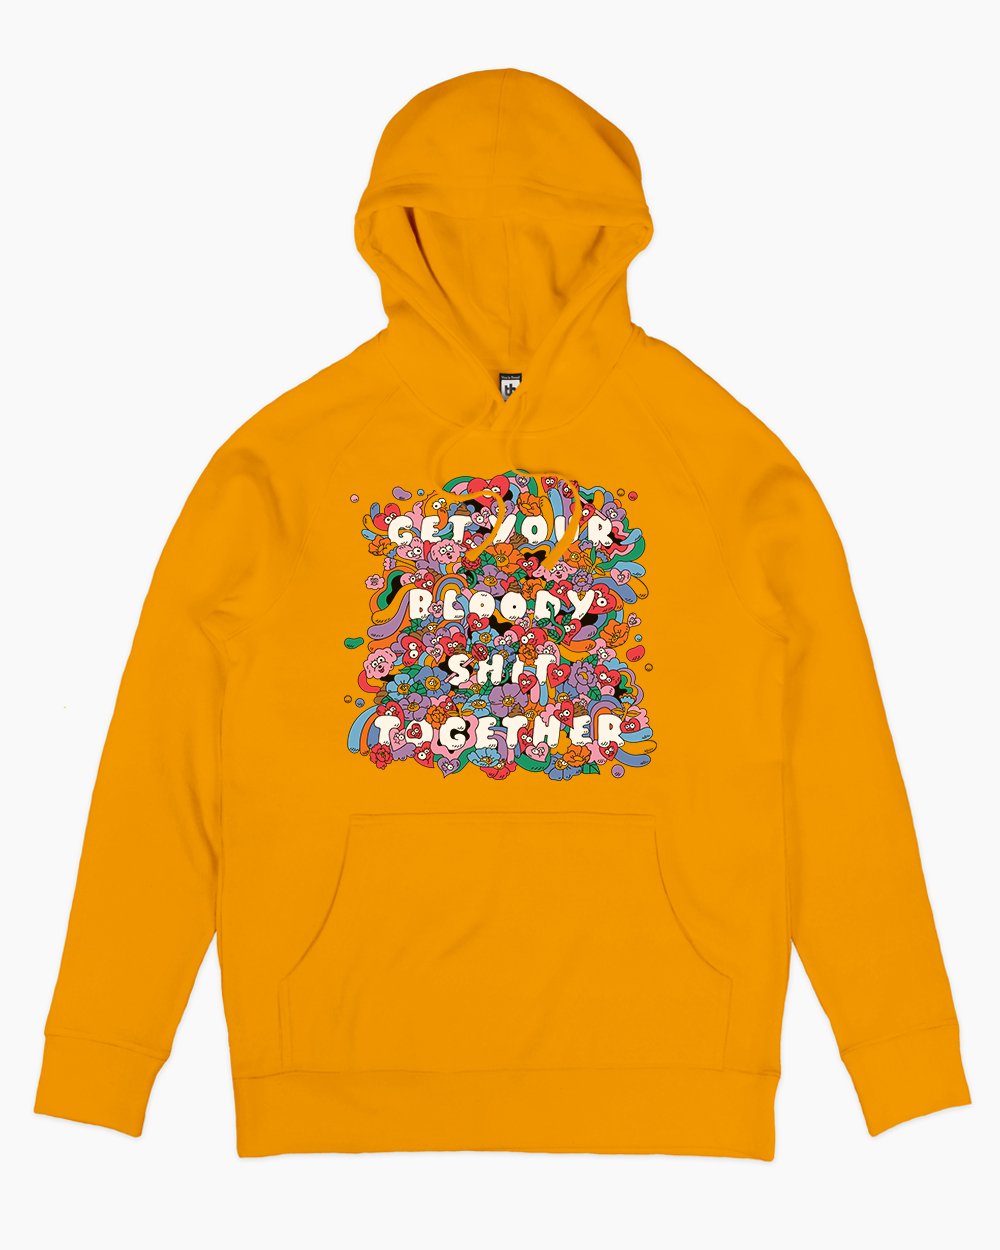 Get Your Bloody Shit Together Hoodie Australia Online #colour_yellow